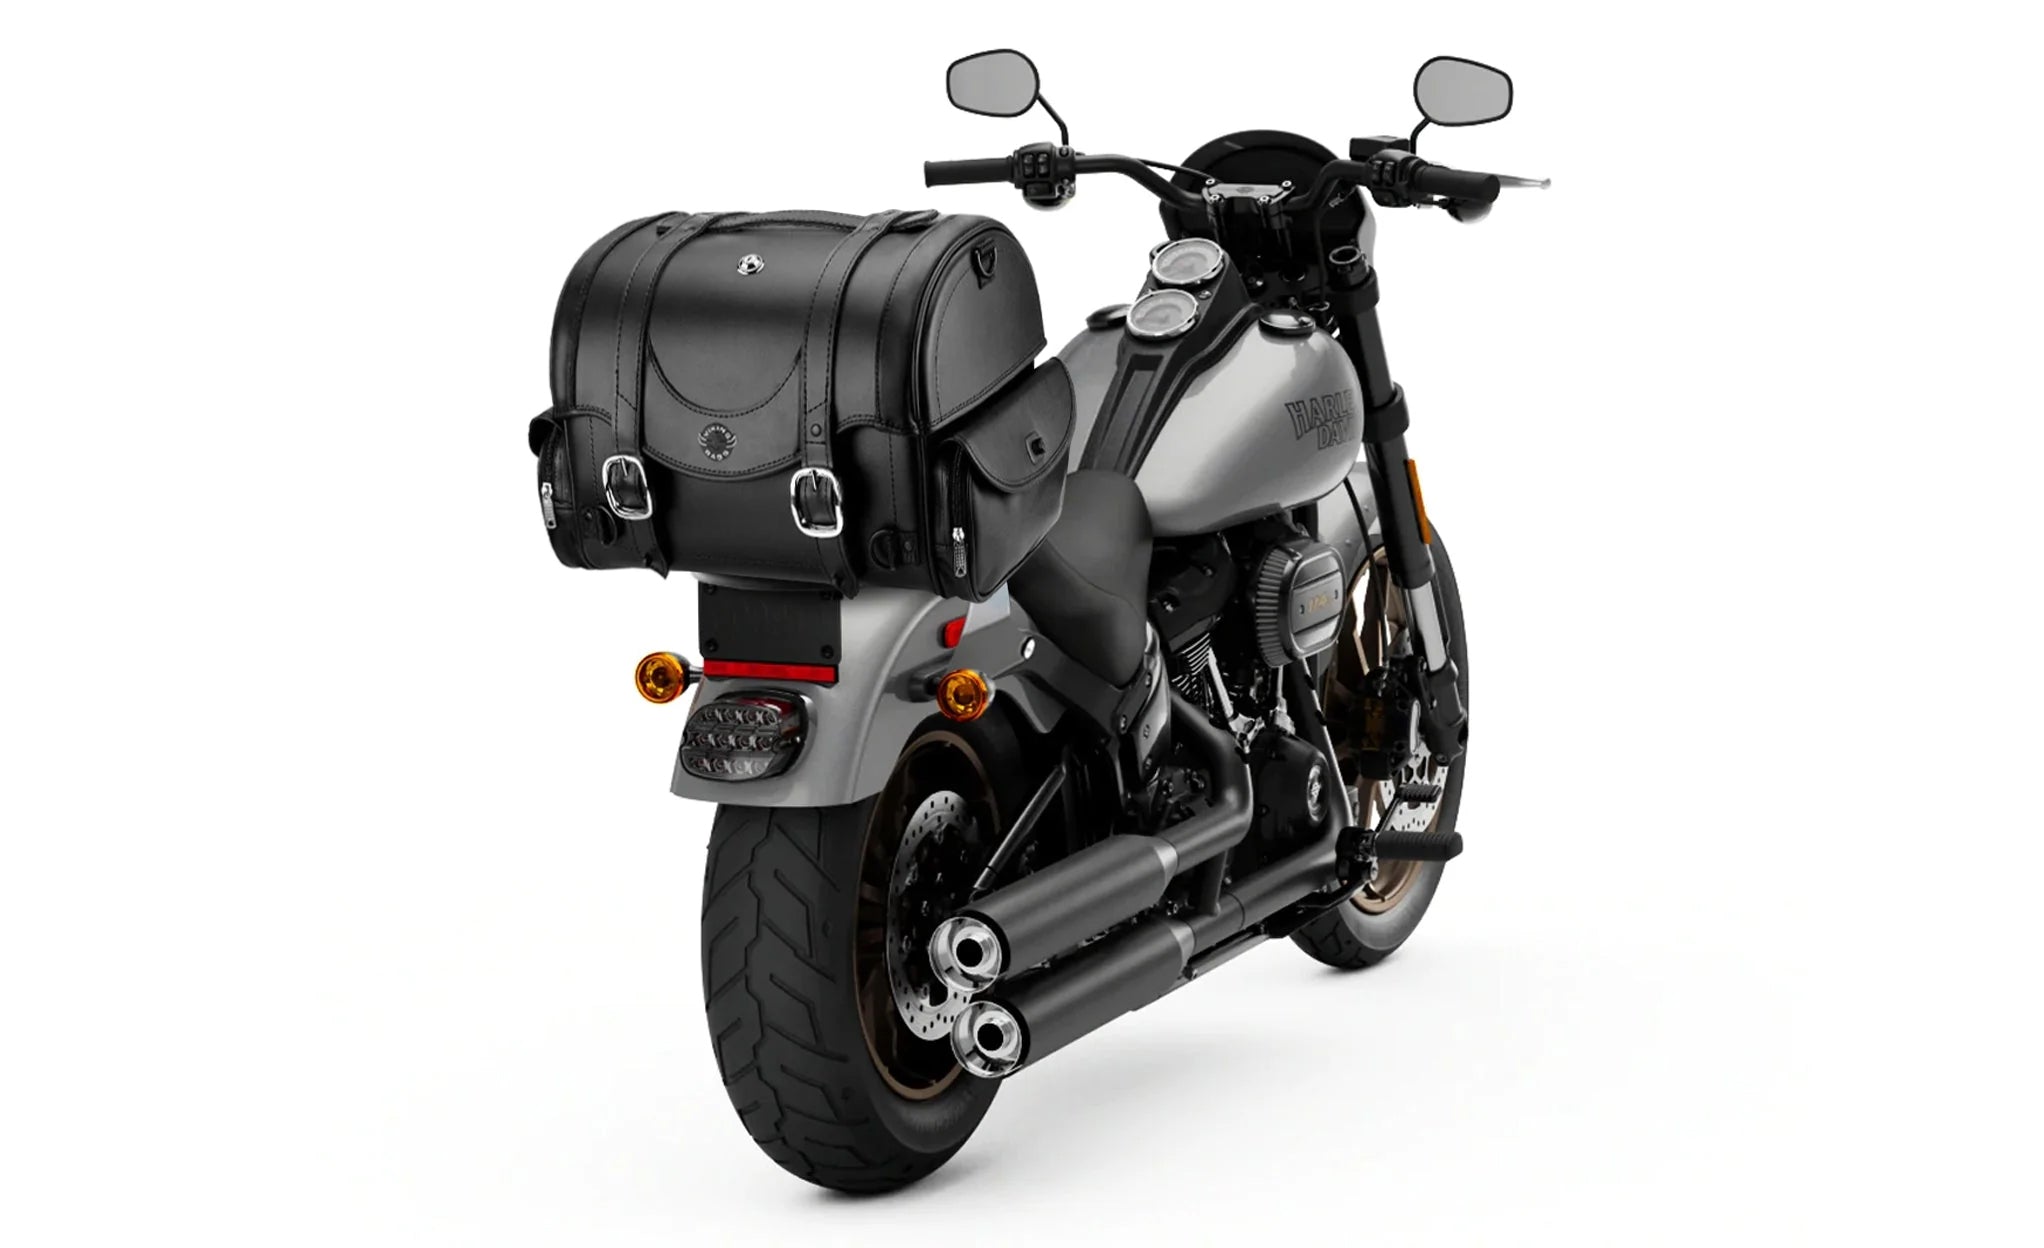 21L - Century Medium Leather Motorcycle Tail Bag for Harley Davidson on Bike Photo @expand